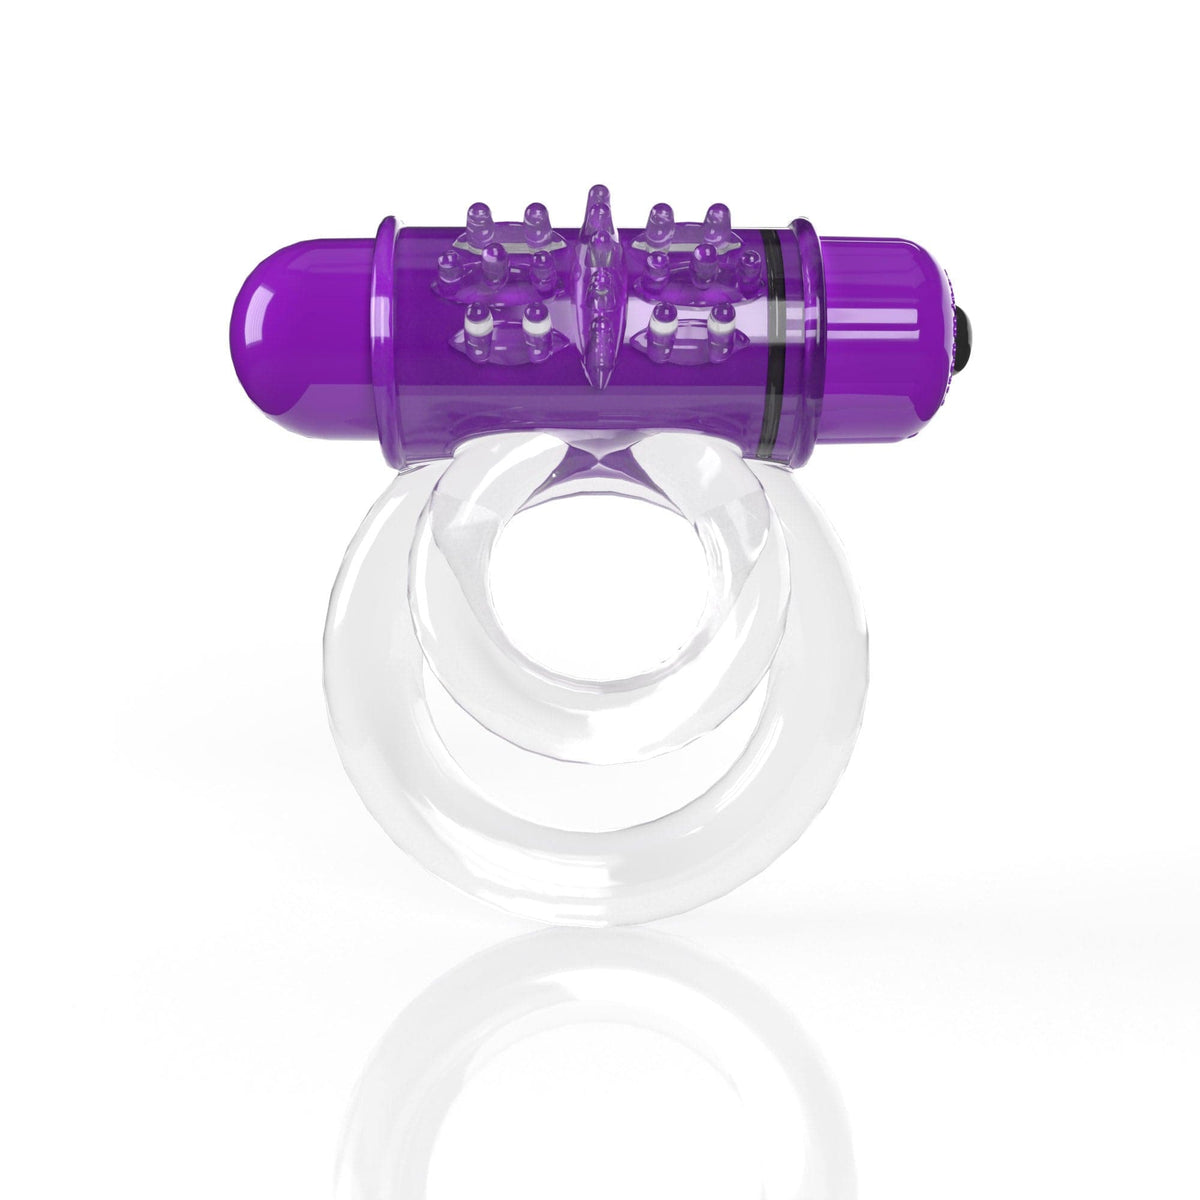 screaming o 4b double o super powered vibrating double ring grape